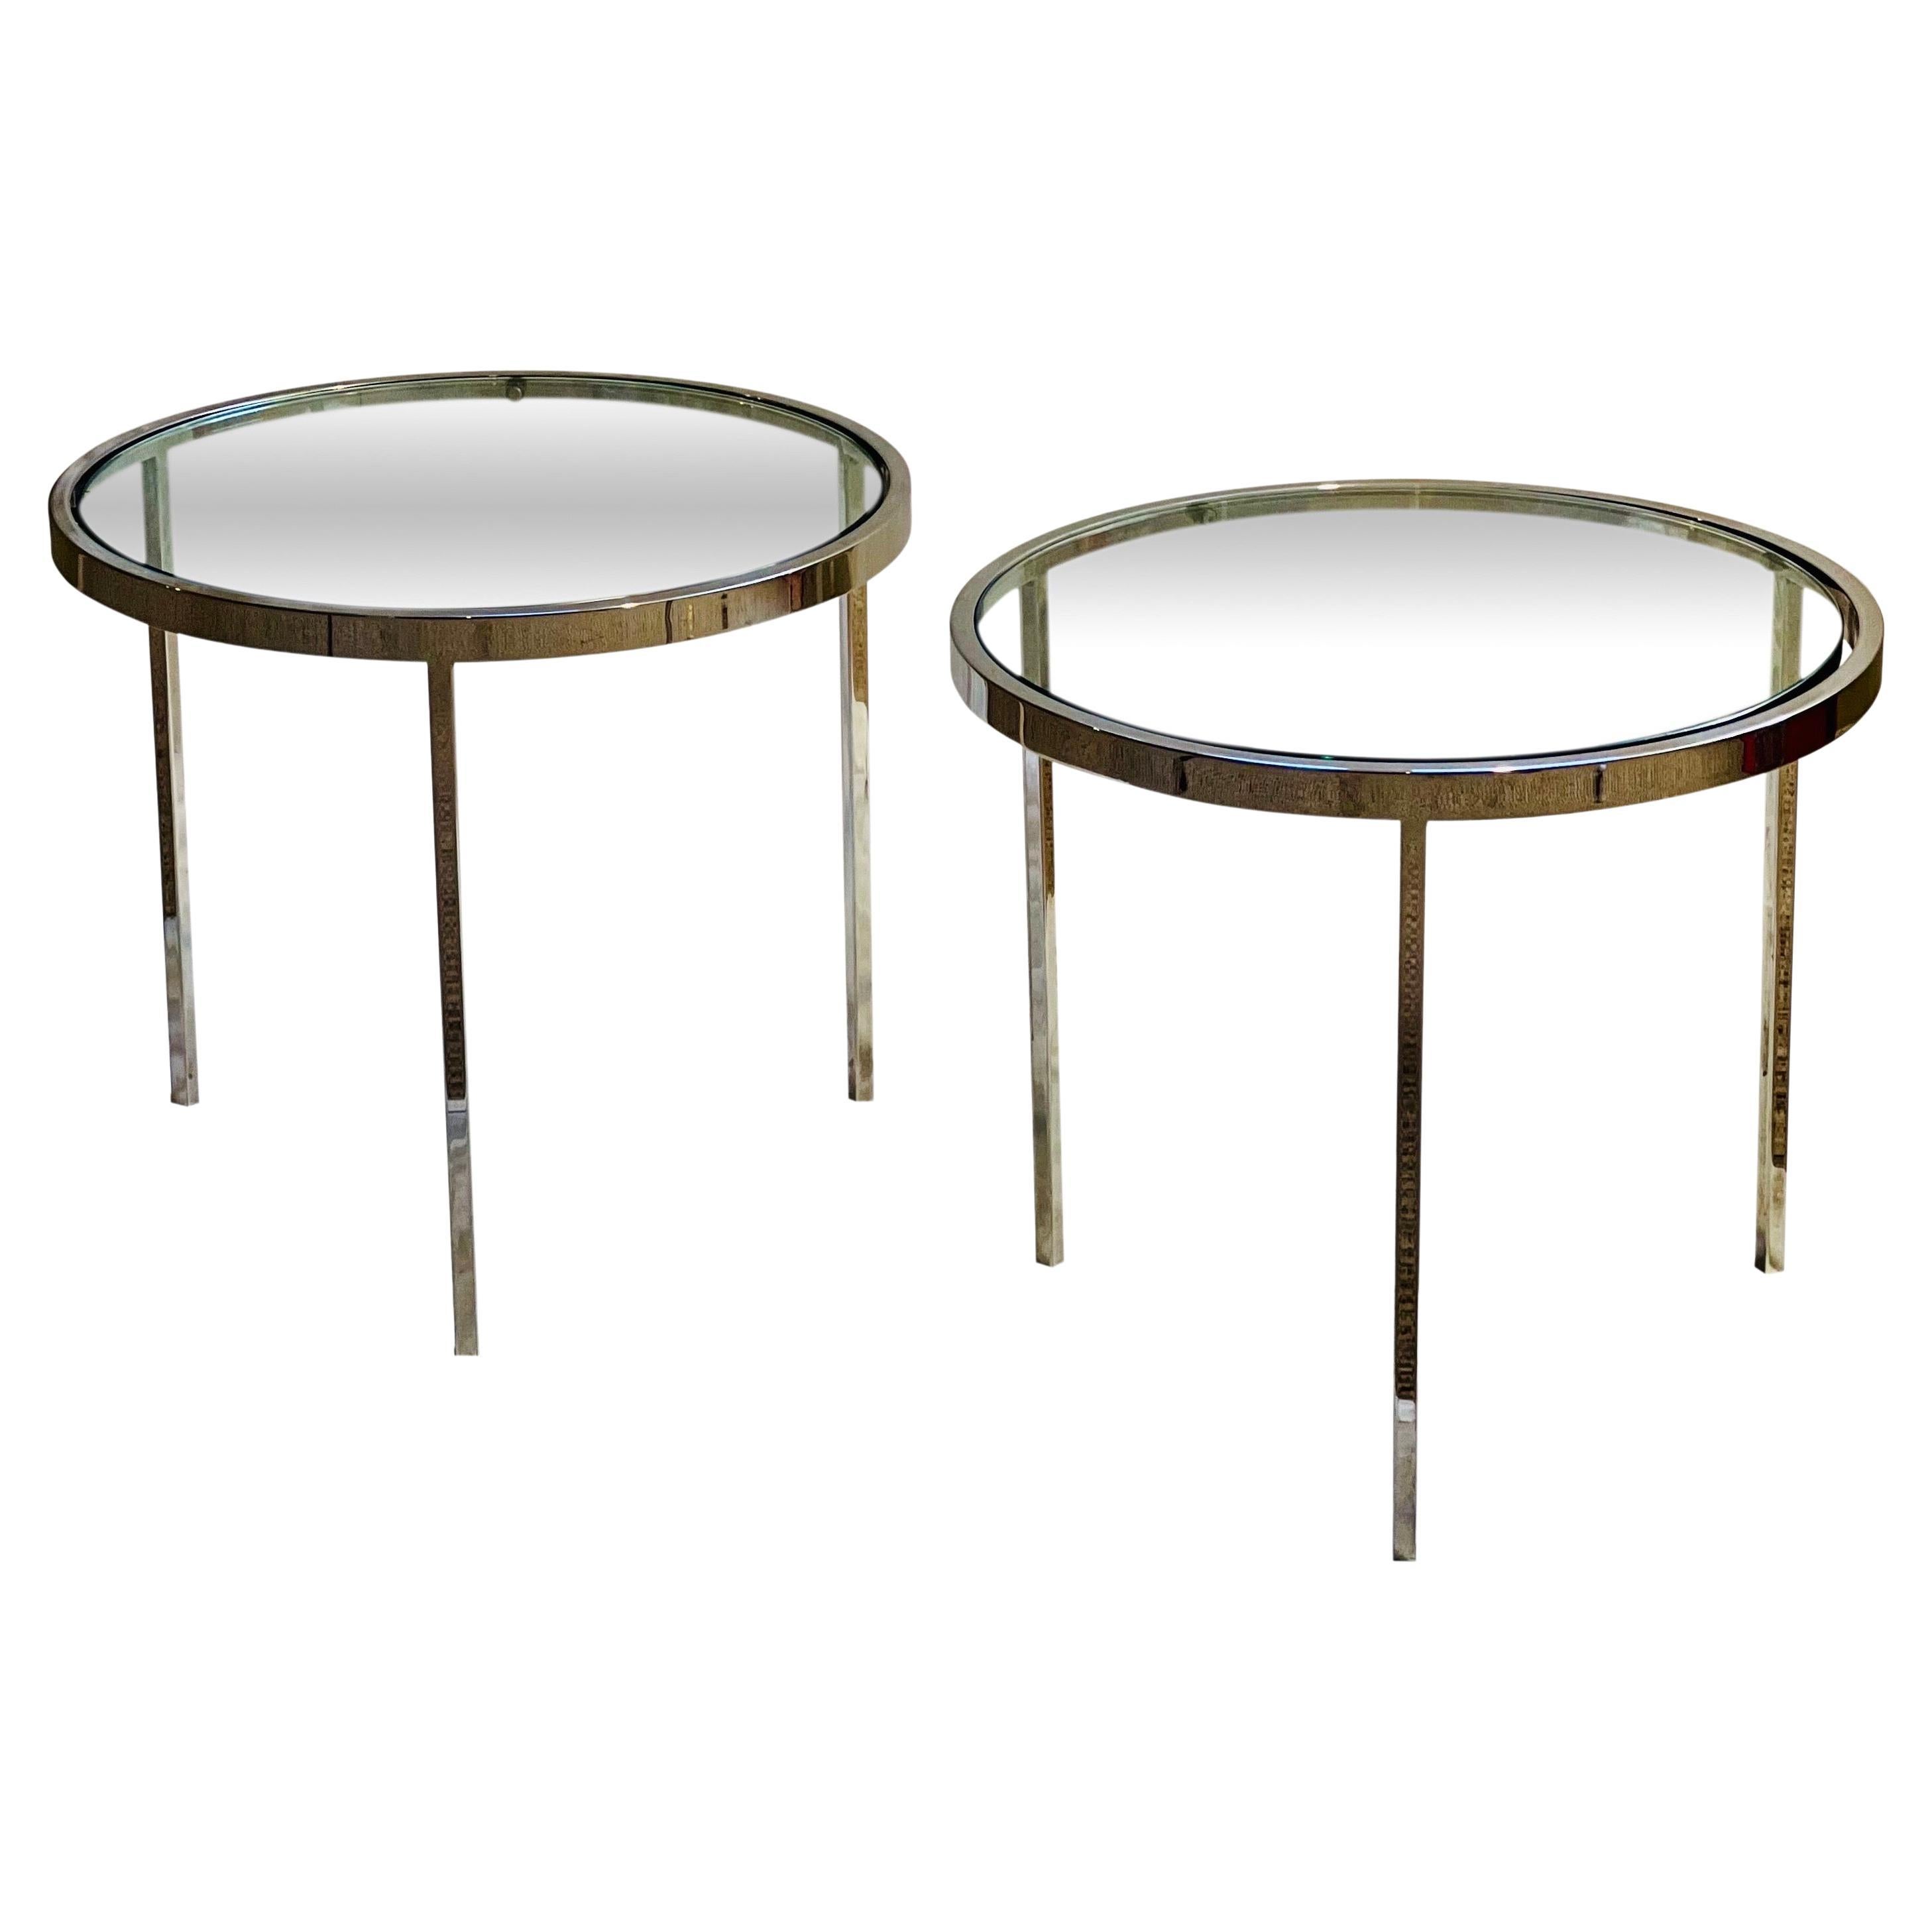 Milo Baughman Flat Bar Chrome and Glass Low Side Tables, Pair